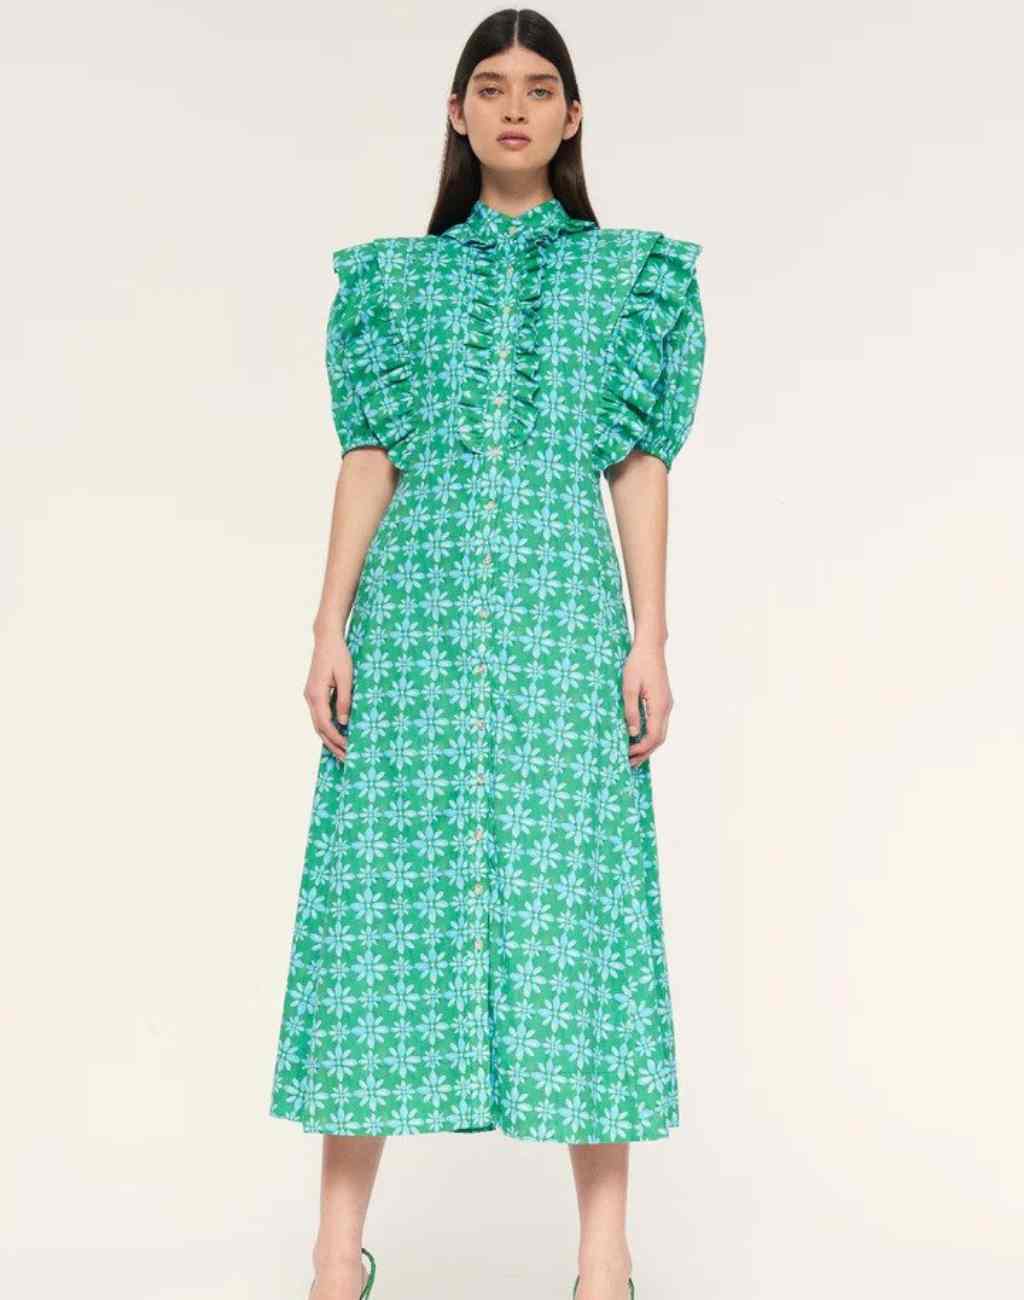 Midi Dress with Ruffled Button Placket, Puffed Sleeves and Full Skirt